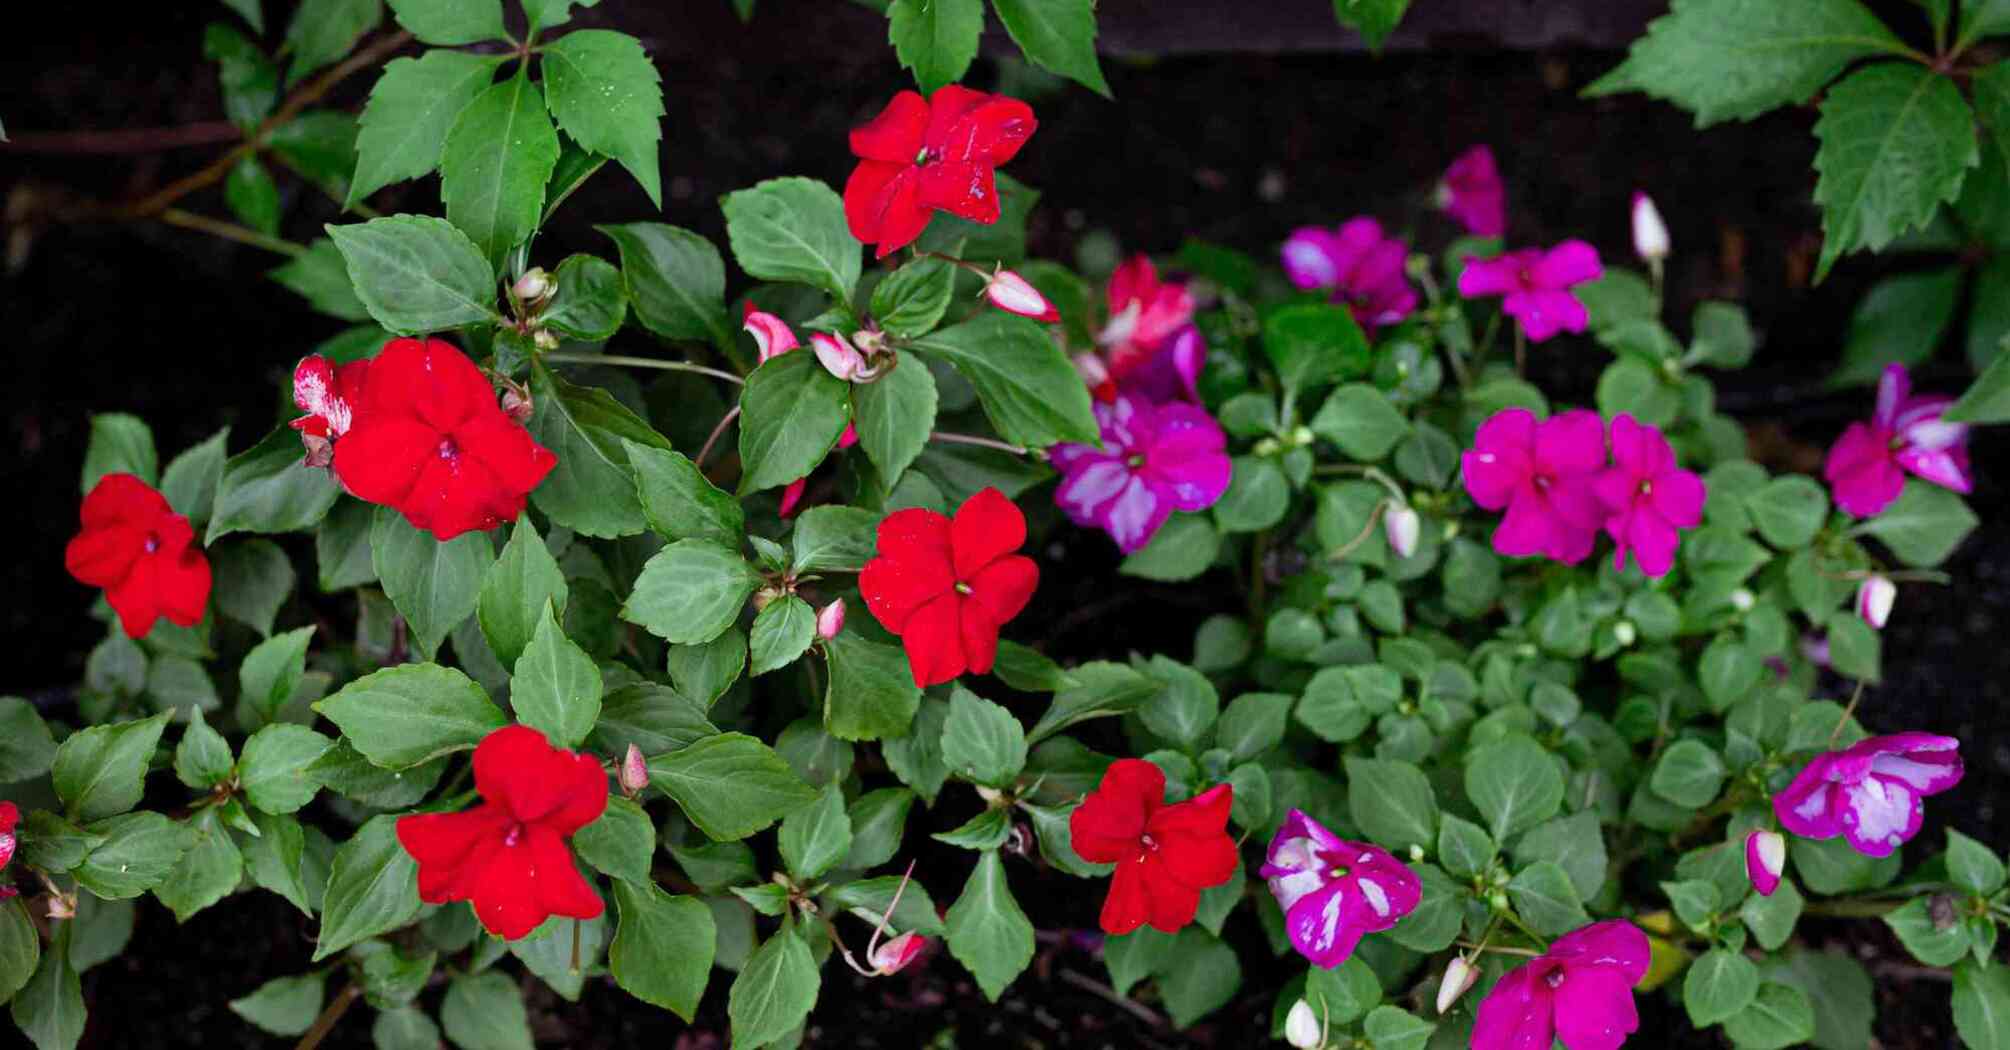 Improve the bloom of violets with a yeast fertilizer